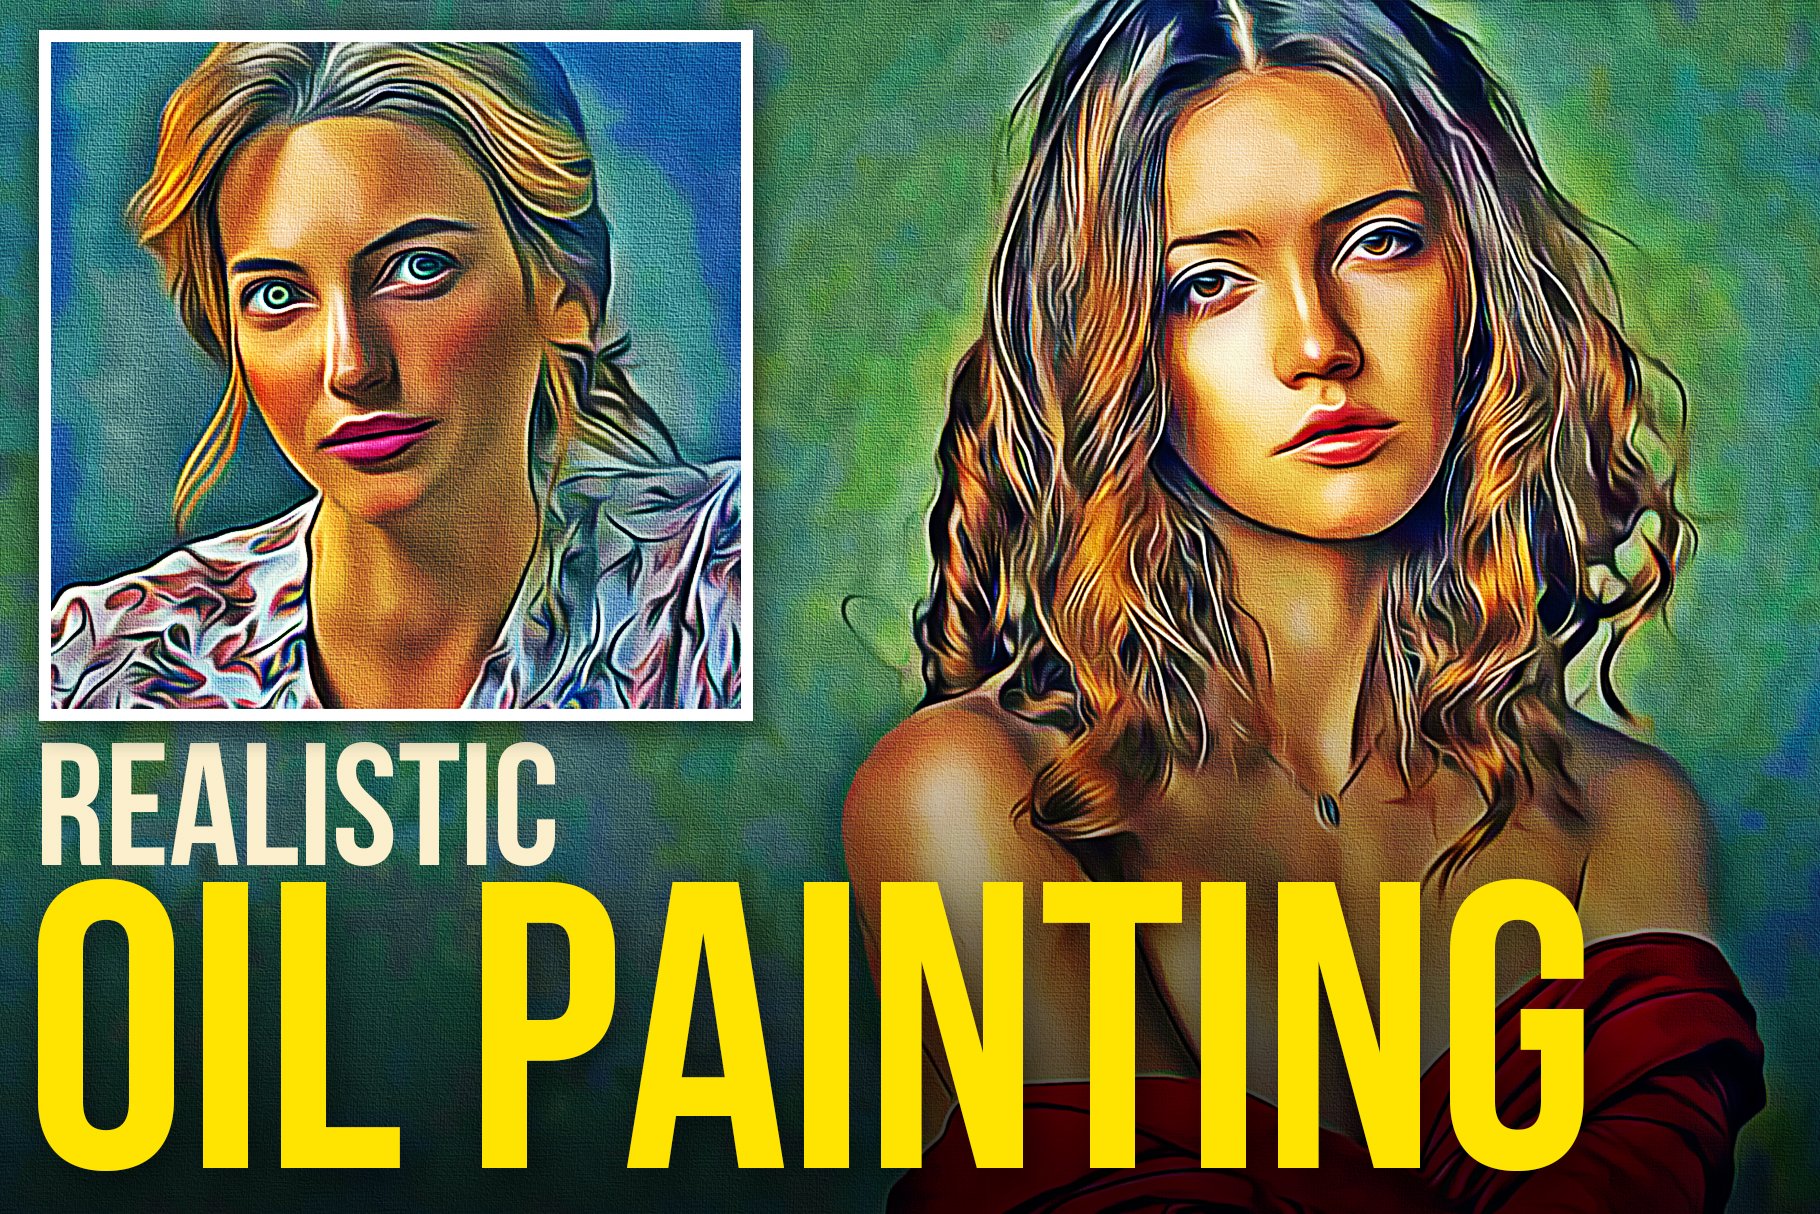 Realistic Oil Painting Artcover image.